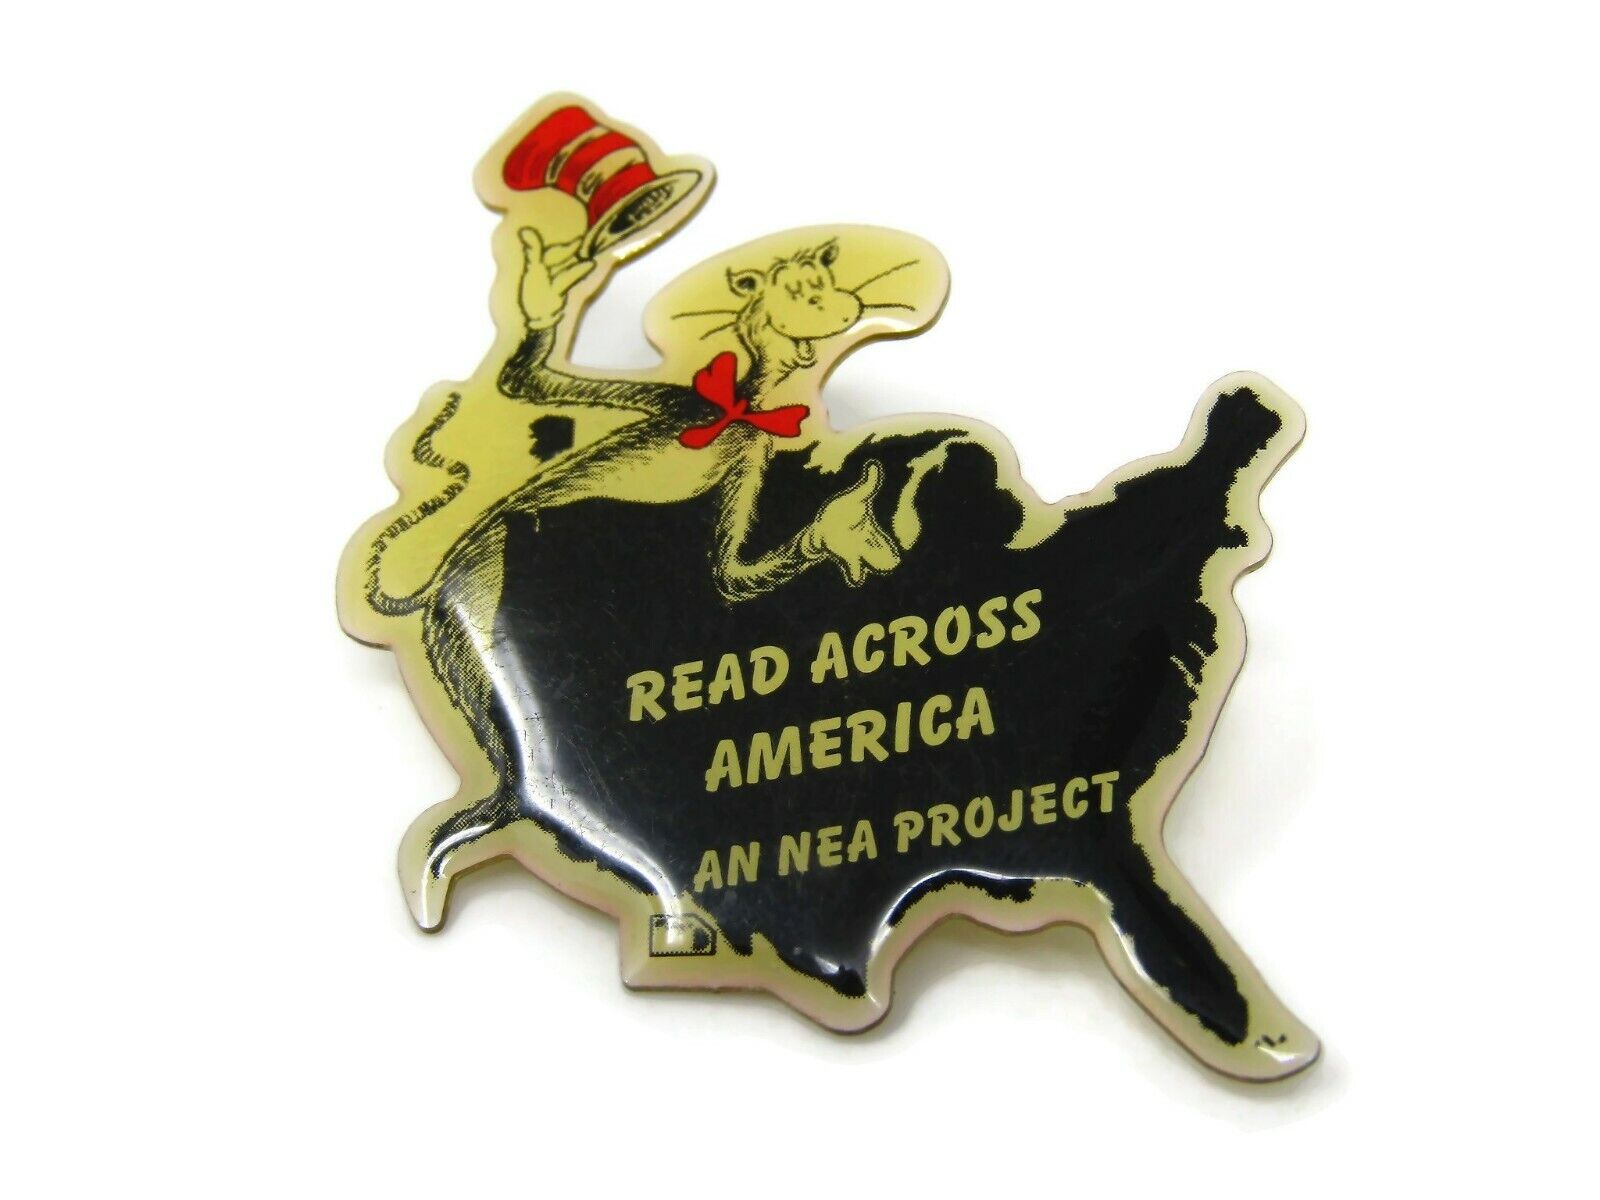 Dr Seuss Pin Read Across America NEA Project Cat in Hat Vintage Collectible